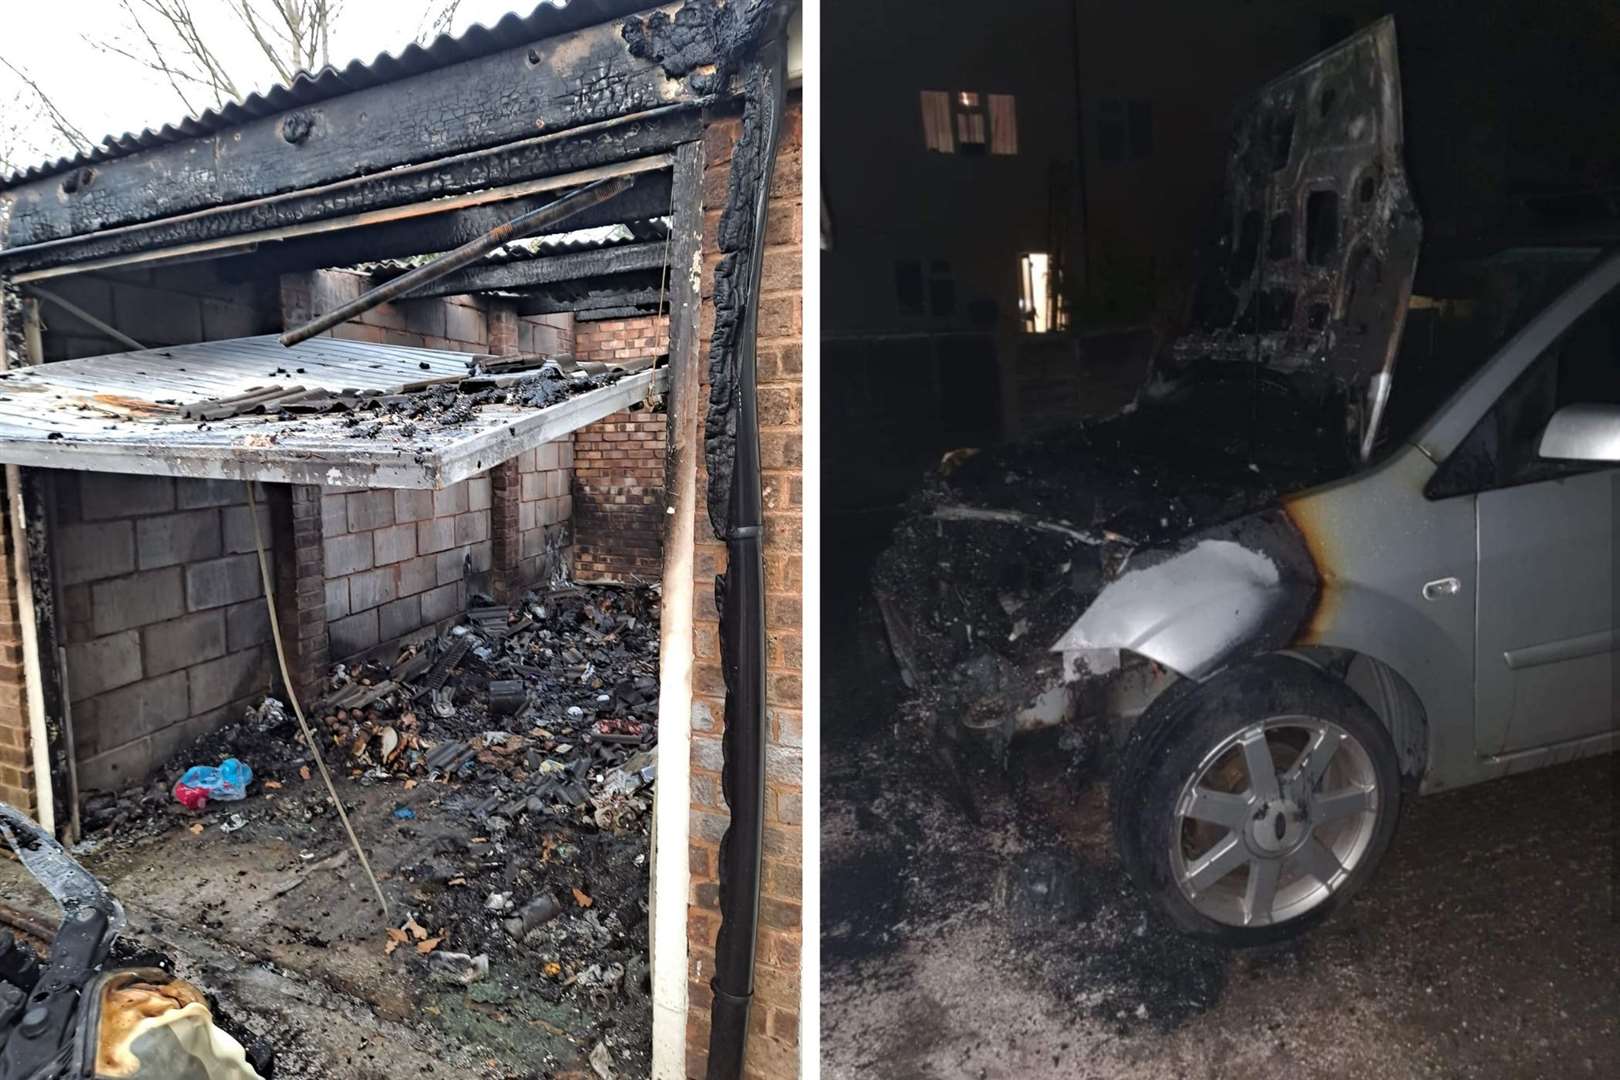 The damage done to the garage and a car in Willesborough